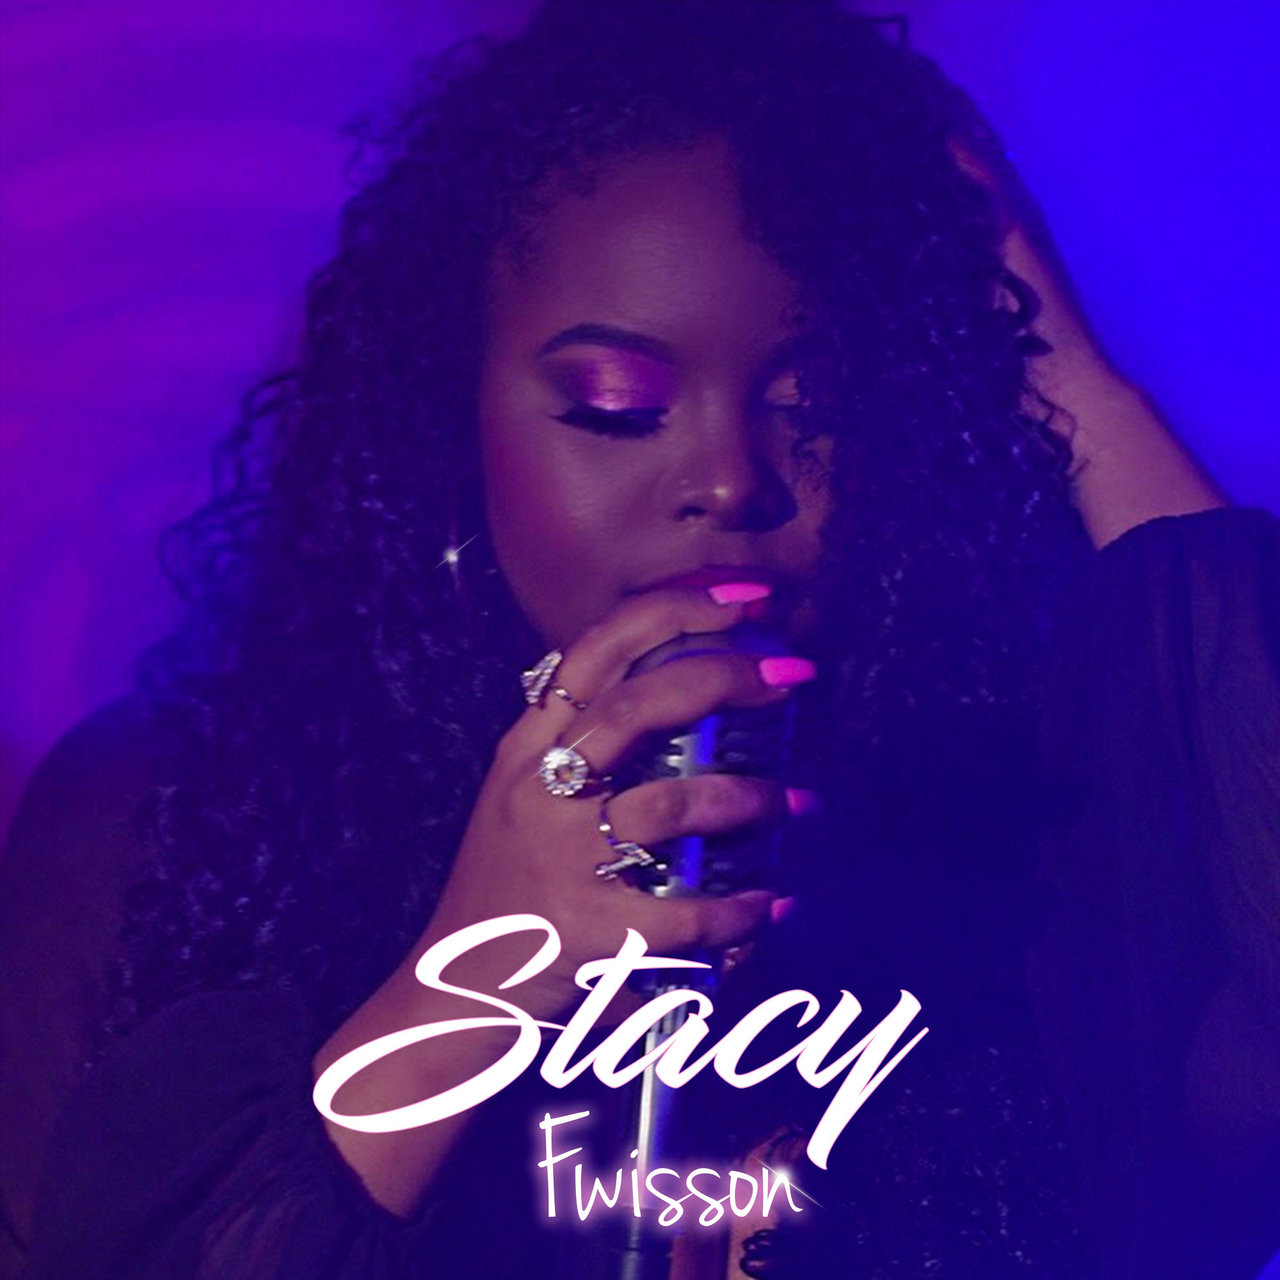 Stacy - Fwisson (Cover)